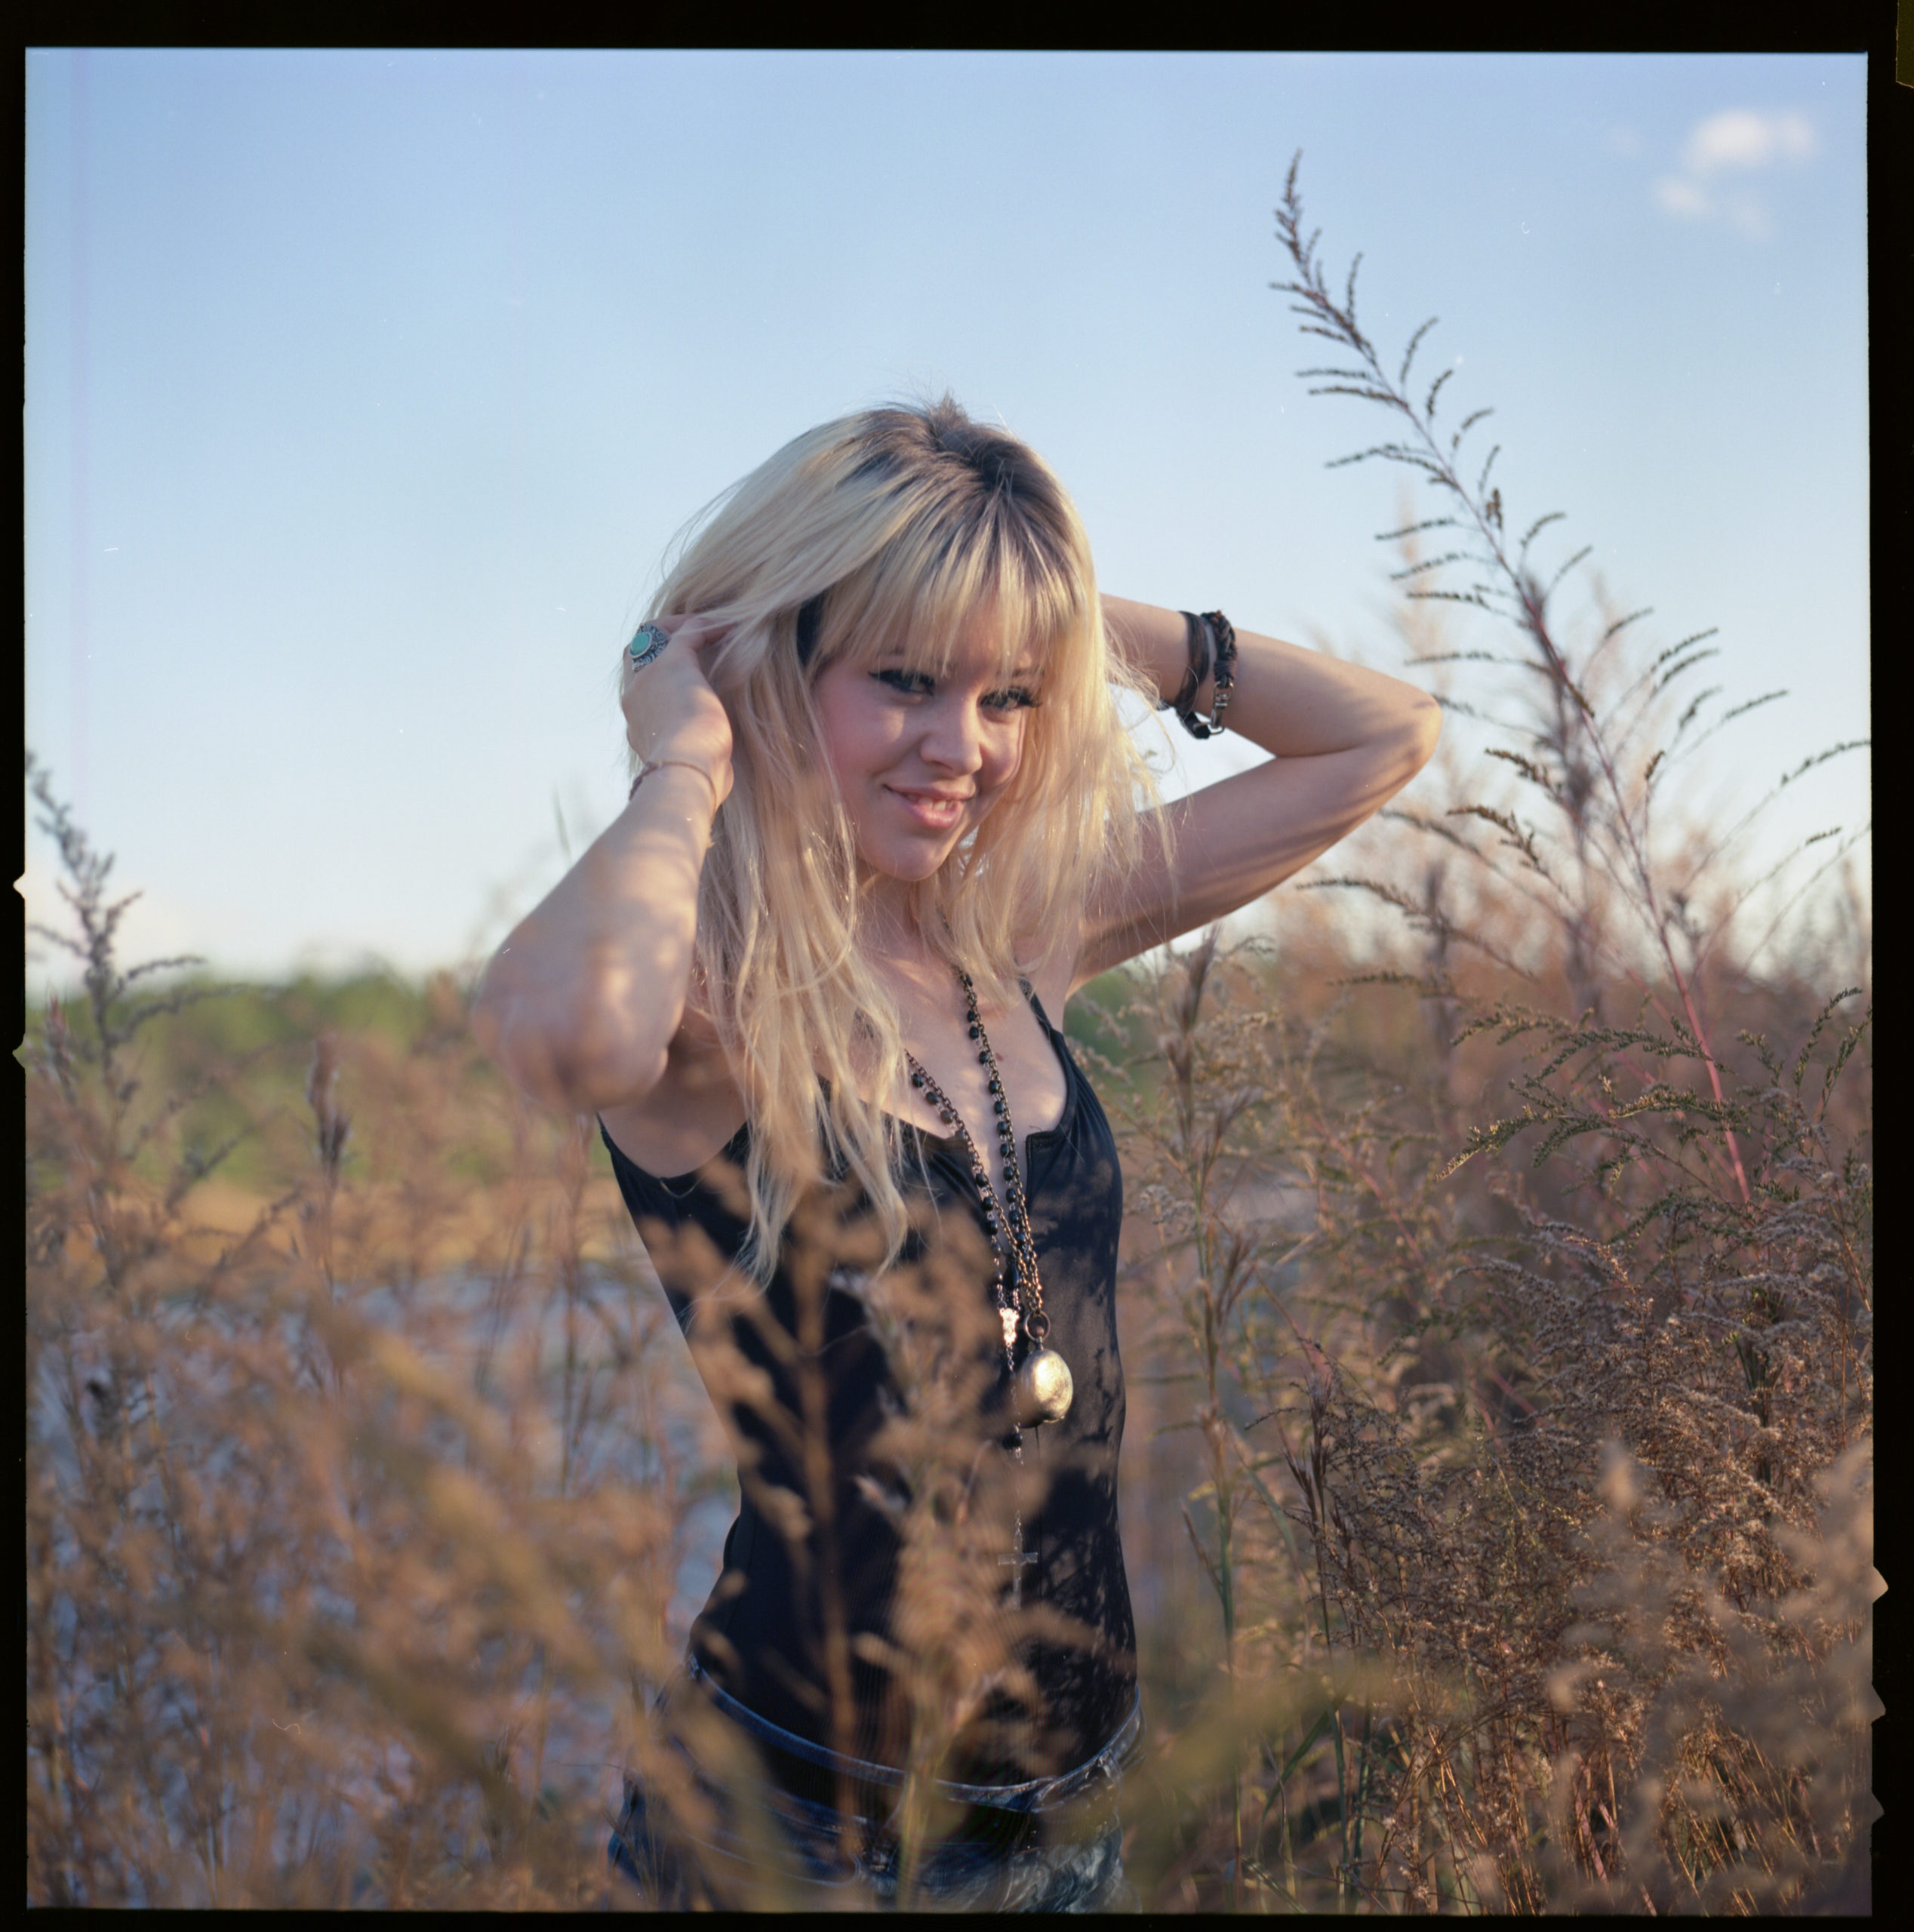 Mandy Murphy and Mojokiss on medium format color negative film shot in a Hasselblad CM500 camera